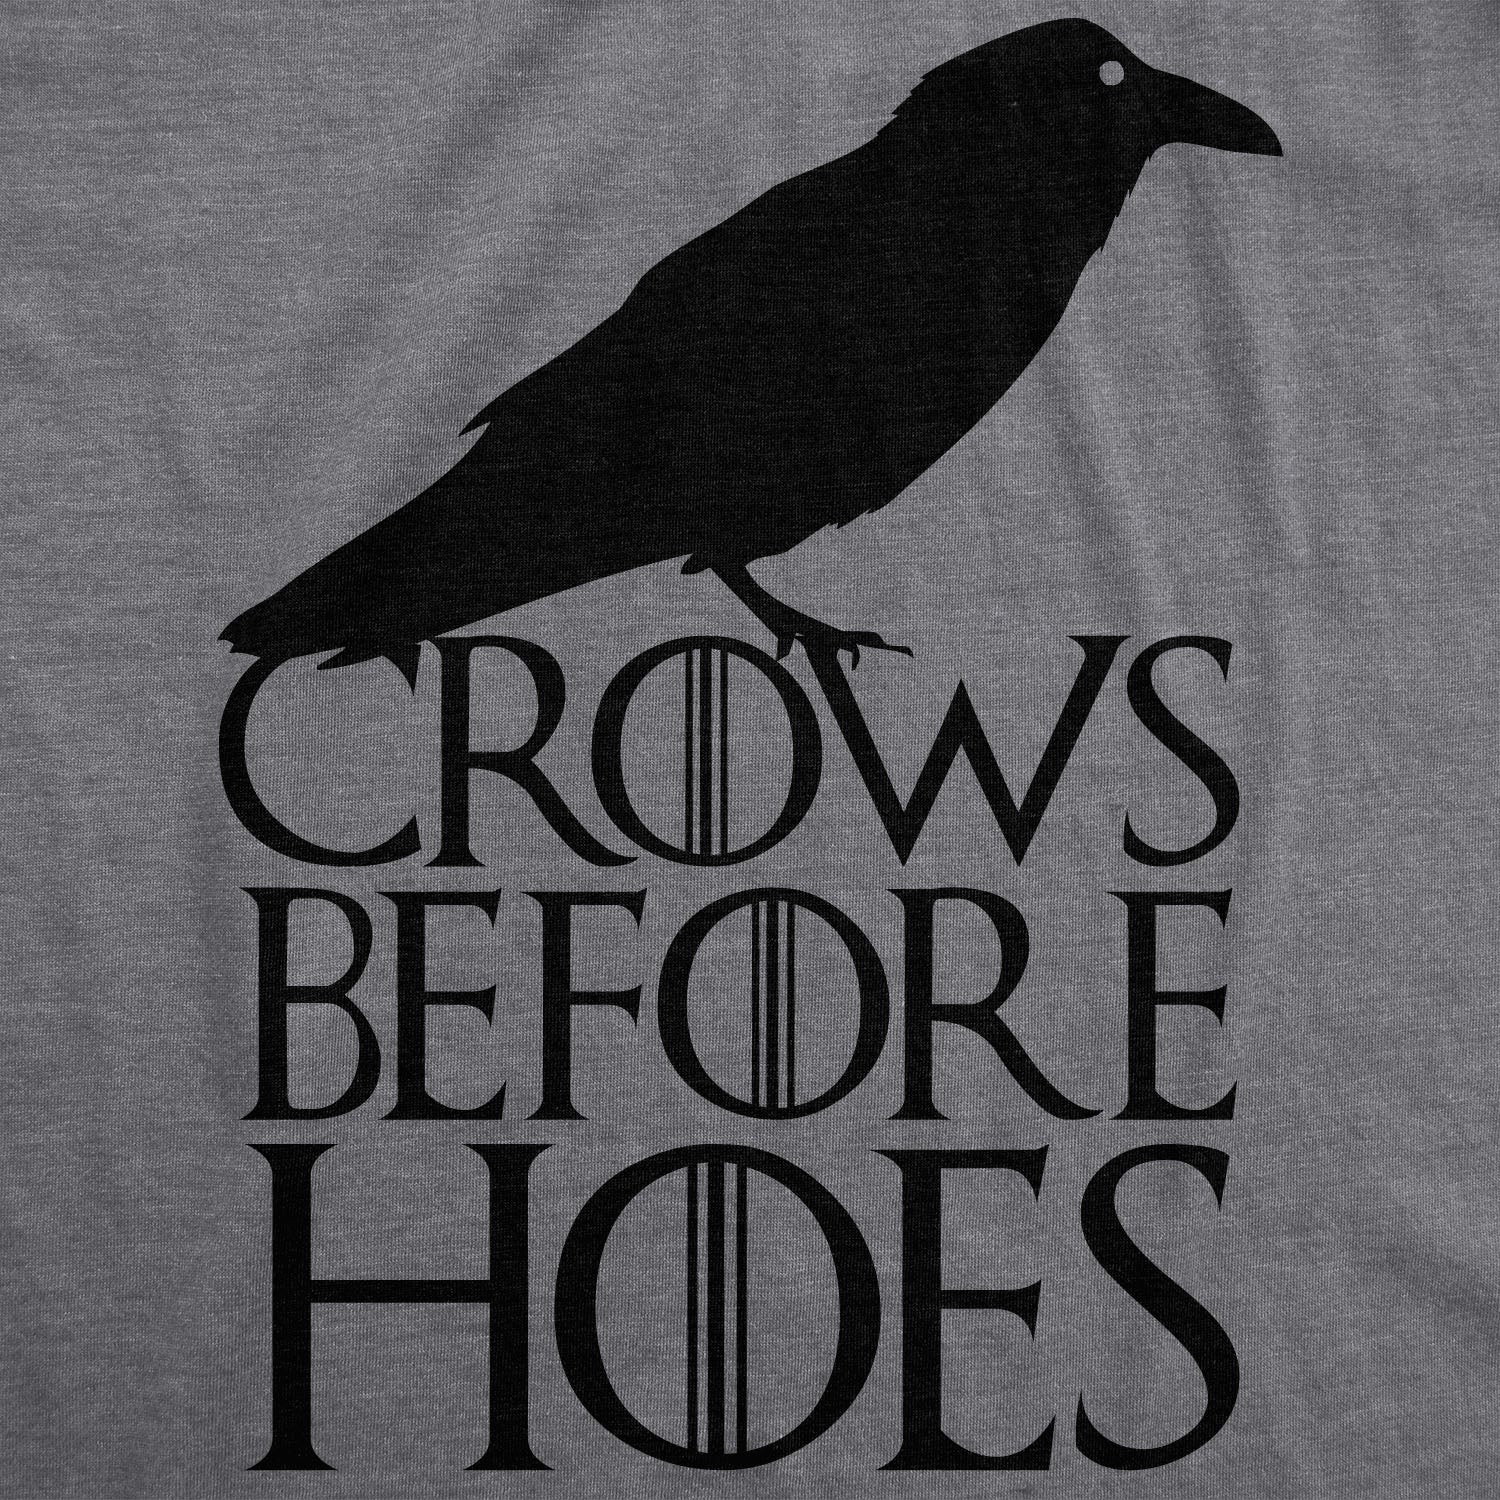 Funny Dark Heather Grey Crows Before Hoes Mens T Shirt Nerdy Animal Retro Tee